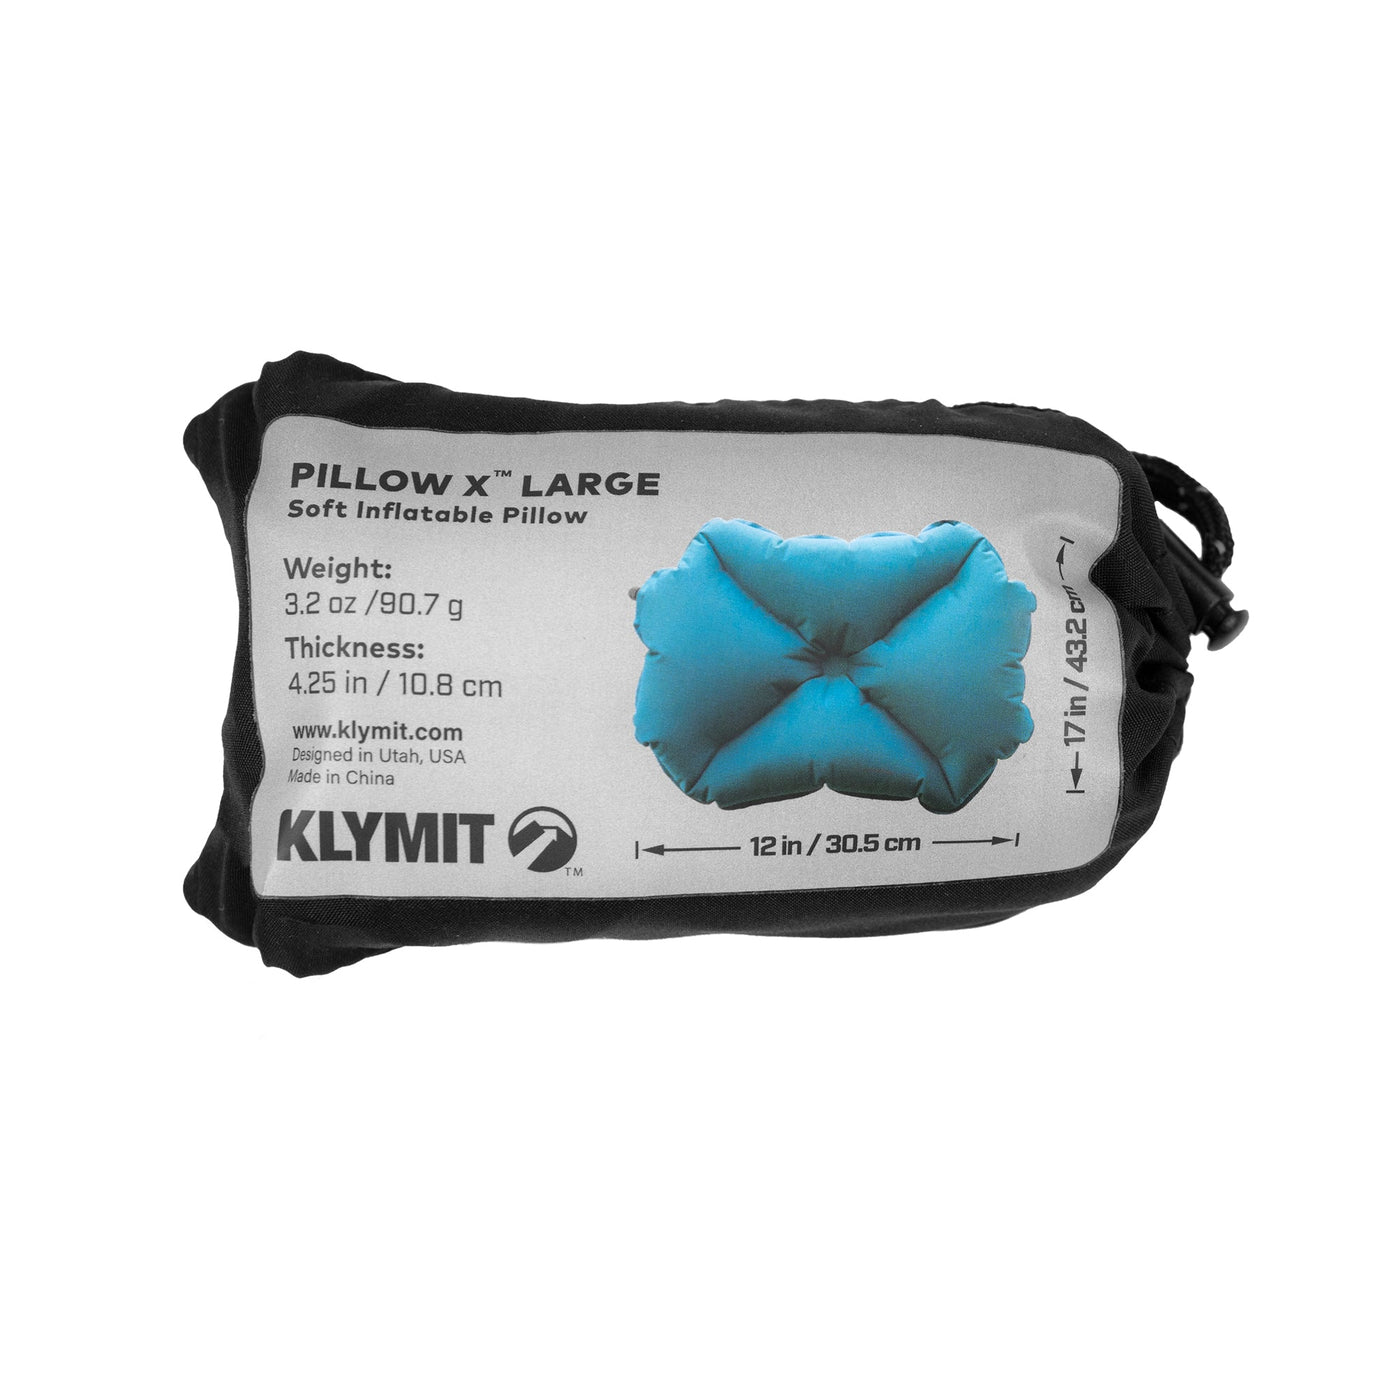 Pillow X Large by Klymit